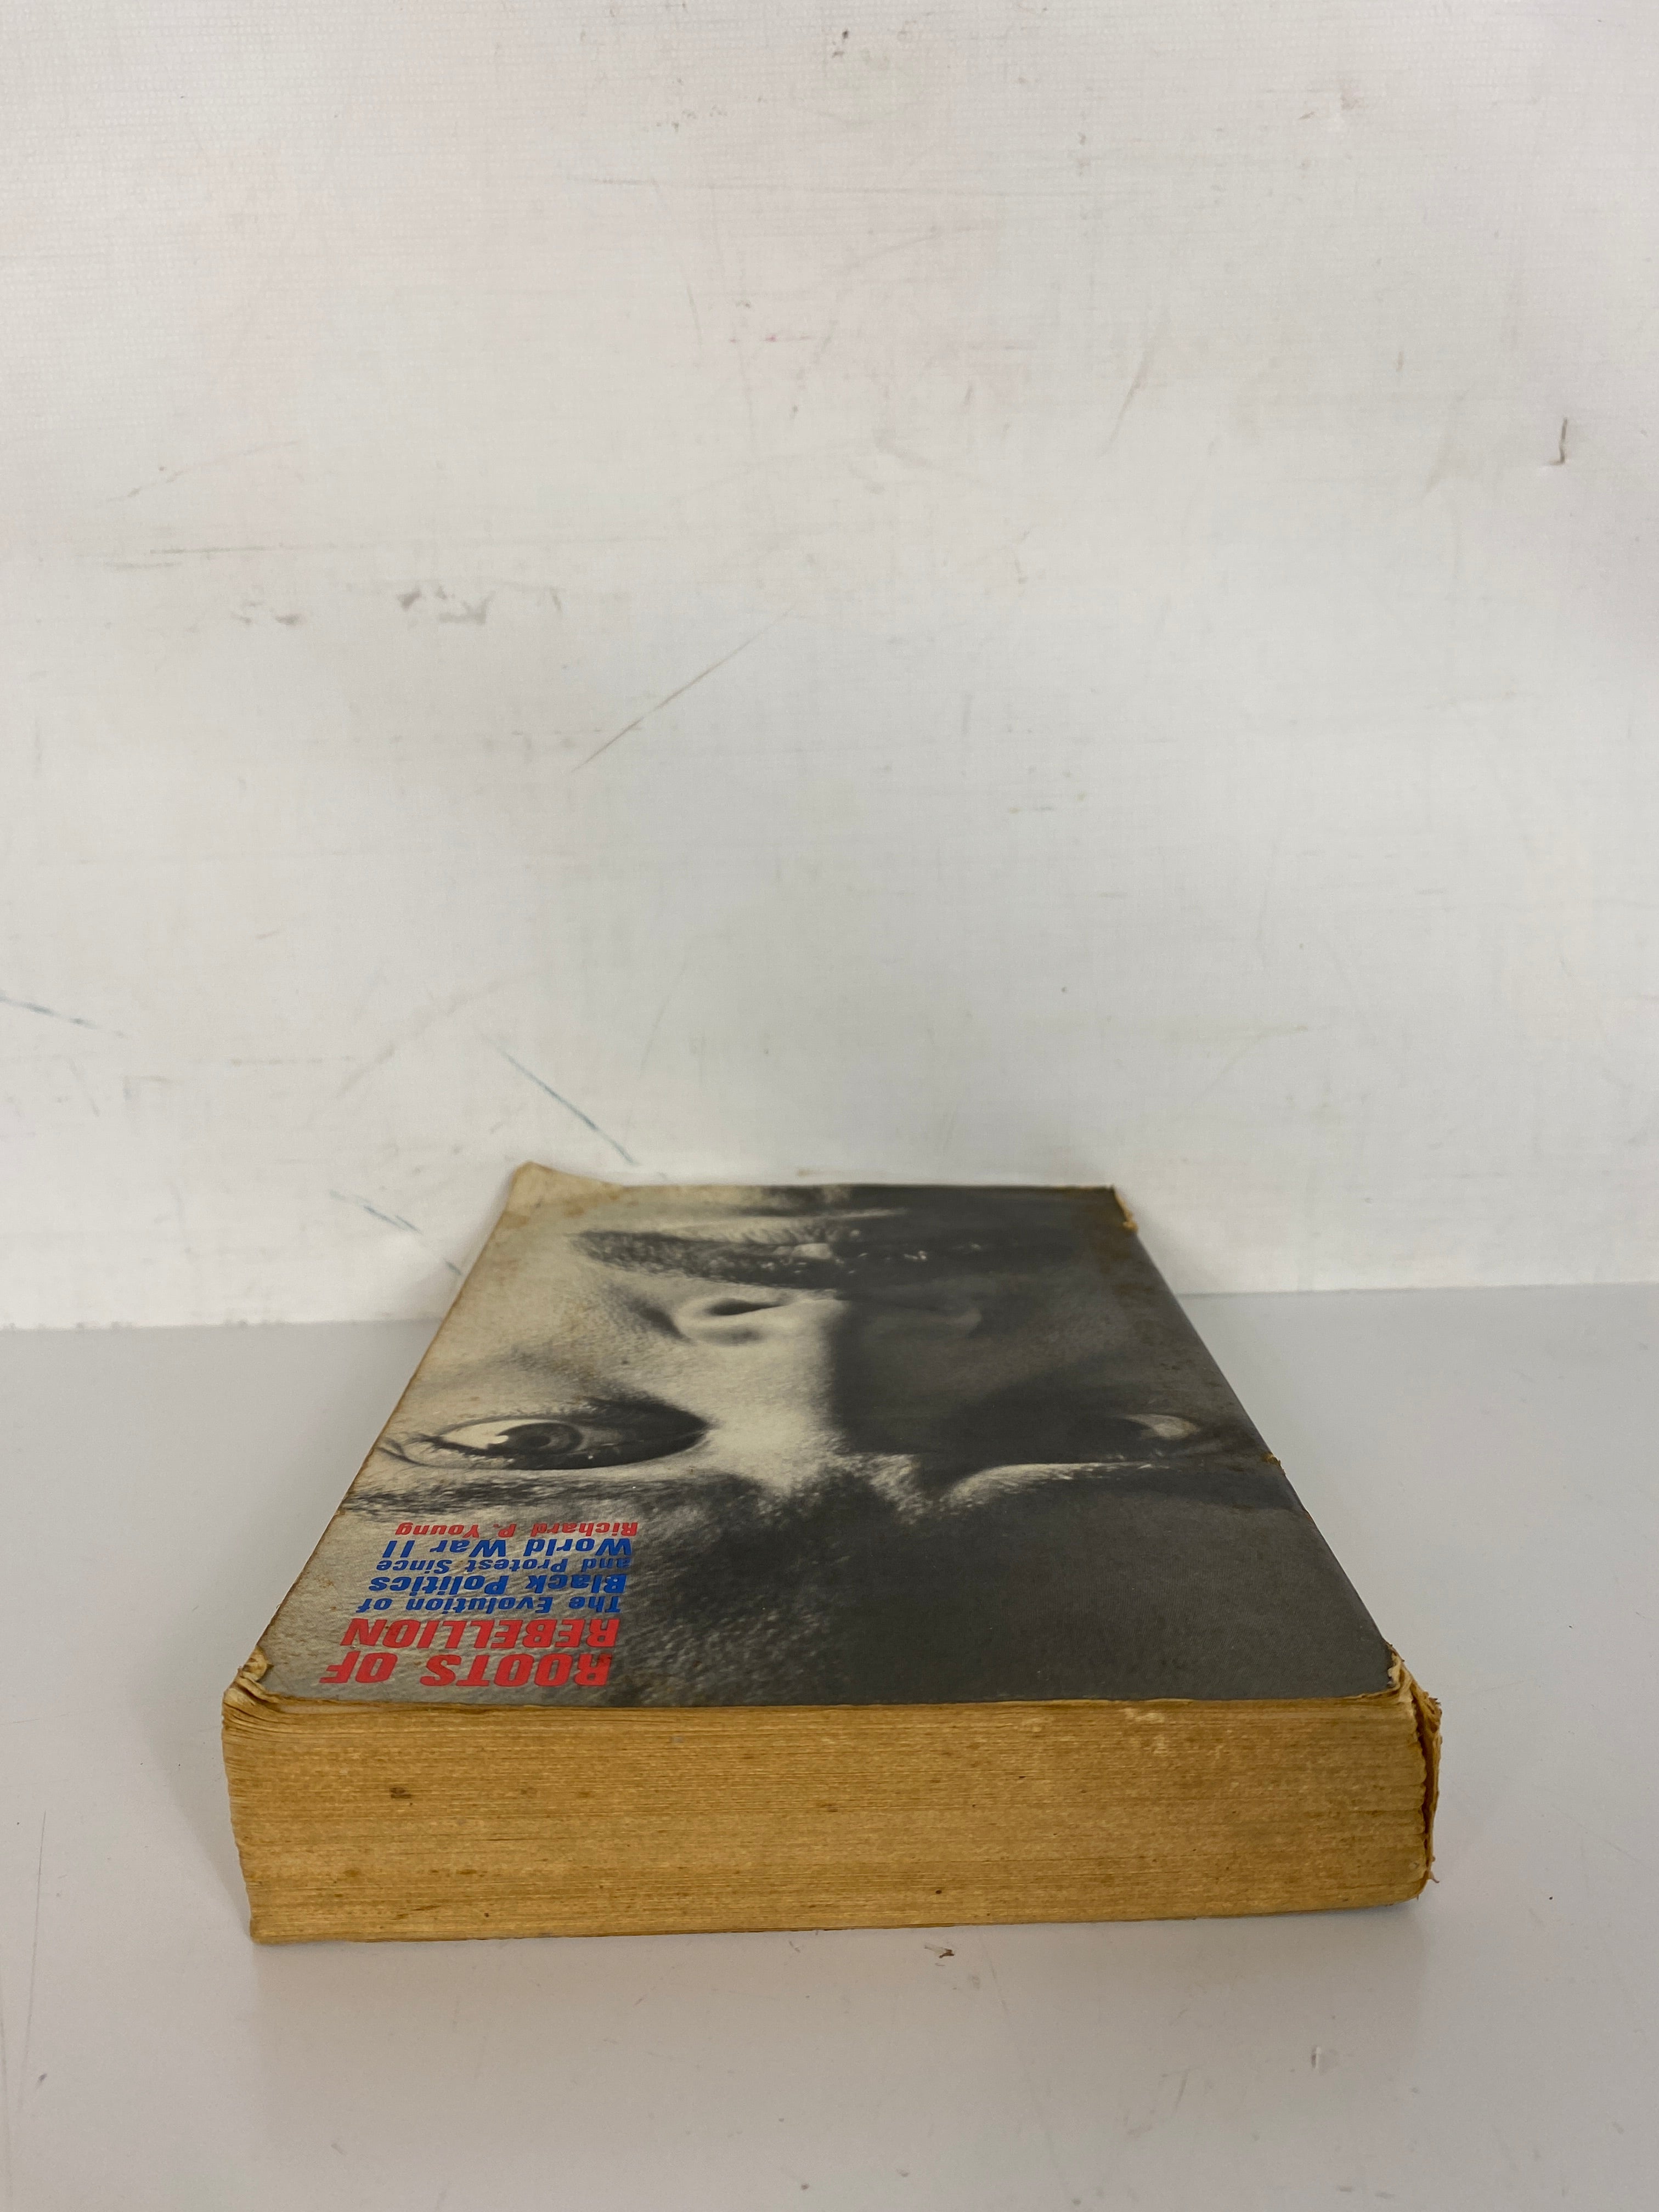 Roots of Rebellion by Richard P. Young 1970 SC